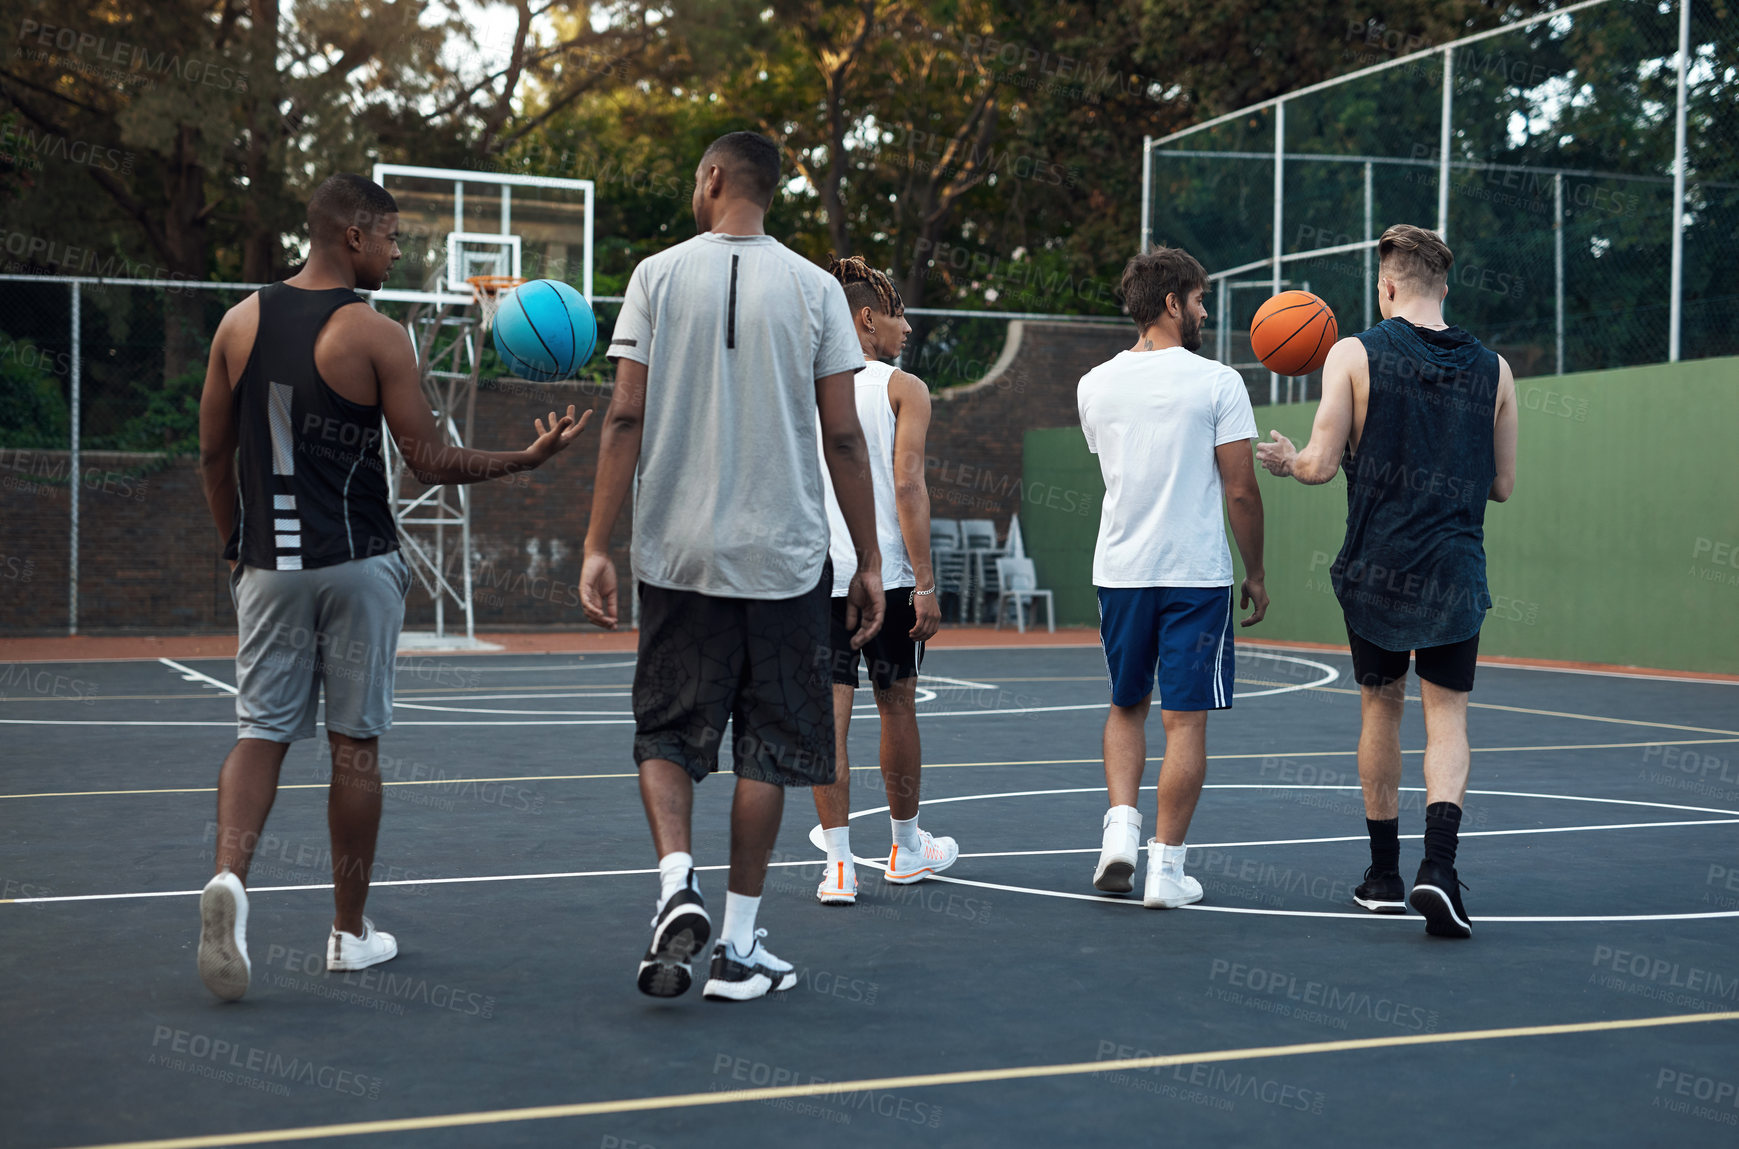 Buy stock photo Rearview shot of a group of sporty young men hanging out on a basketball court